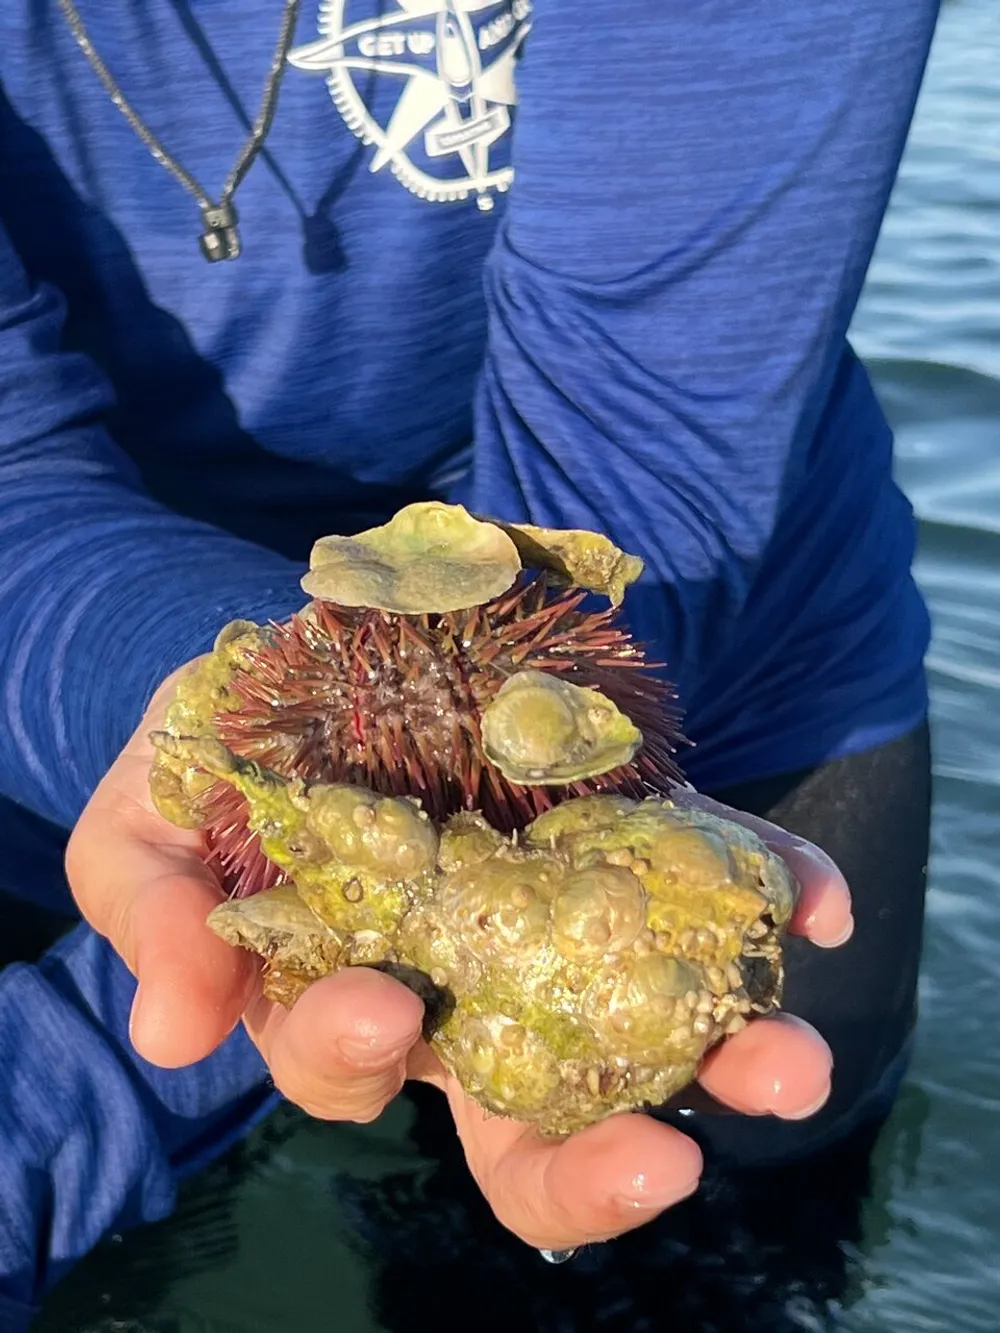 A person wearing a blue long-sleeved shirt holds a sea urchin covered with algae and barnacles over a body of water